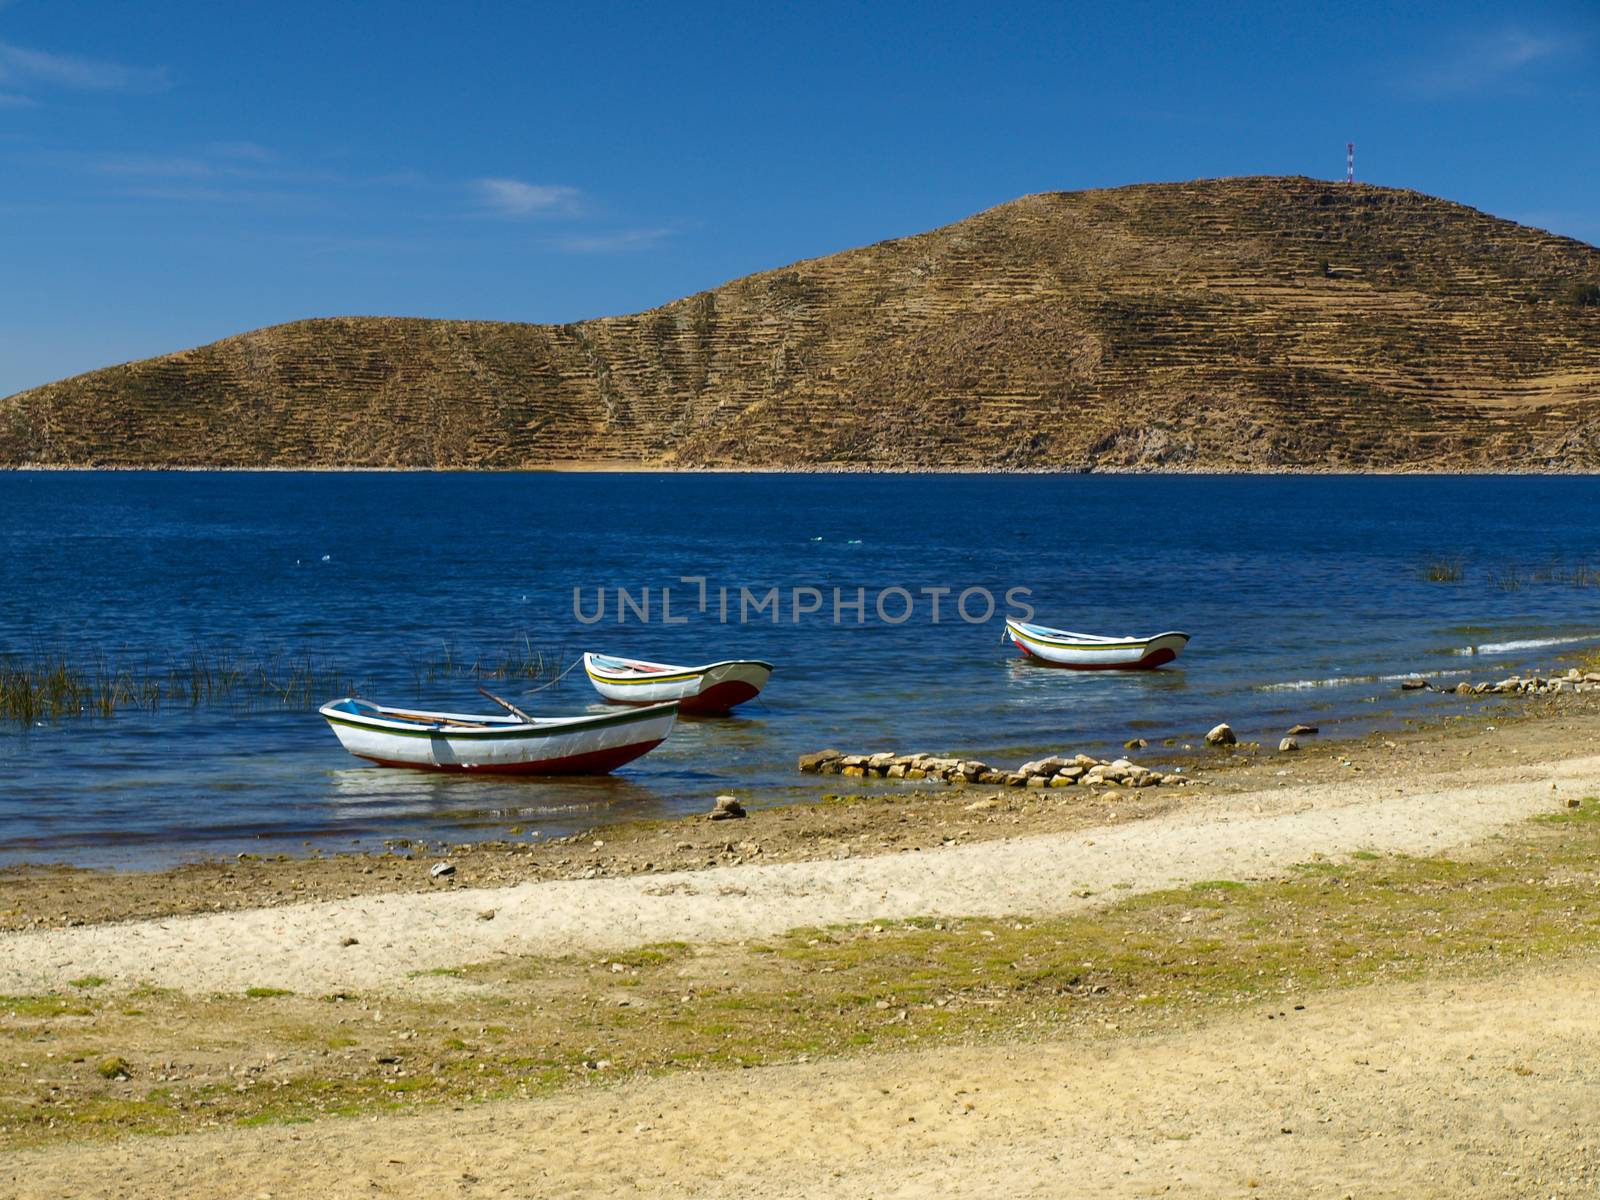 Boats on Titicaca Lake by pyty